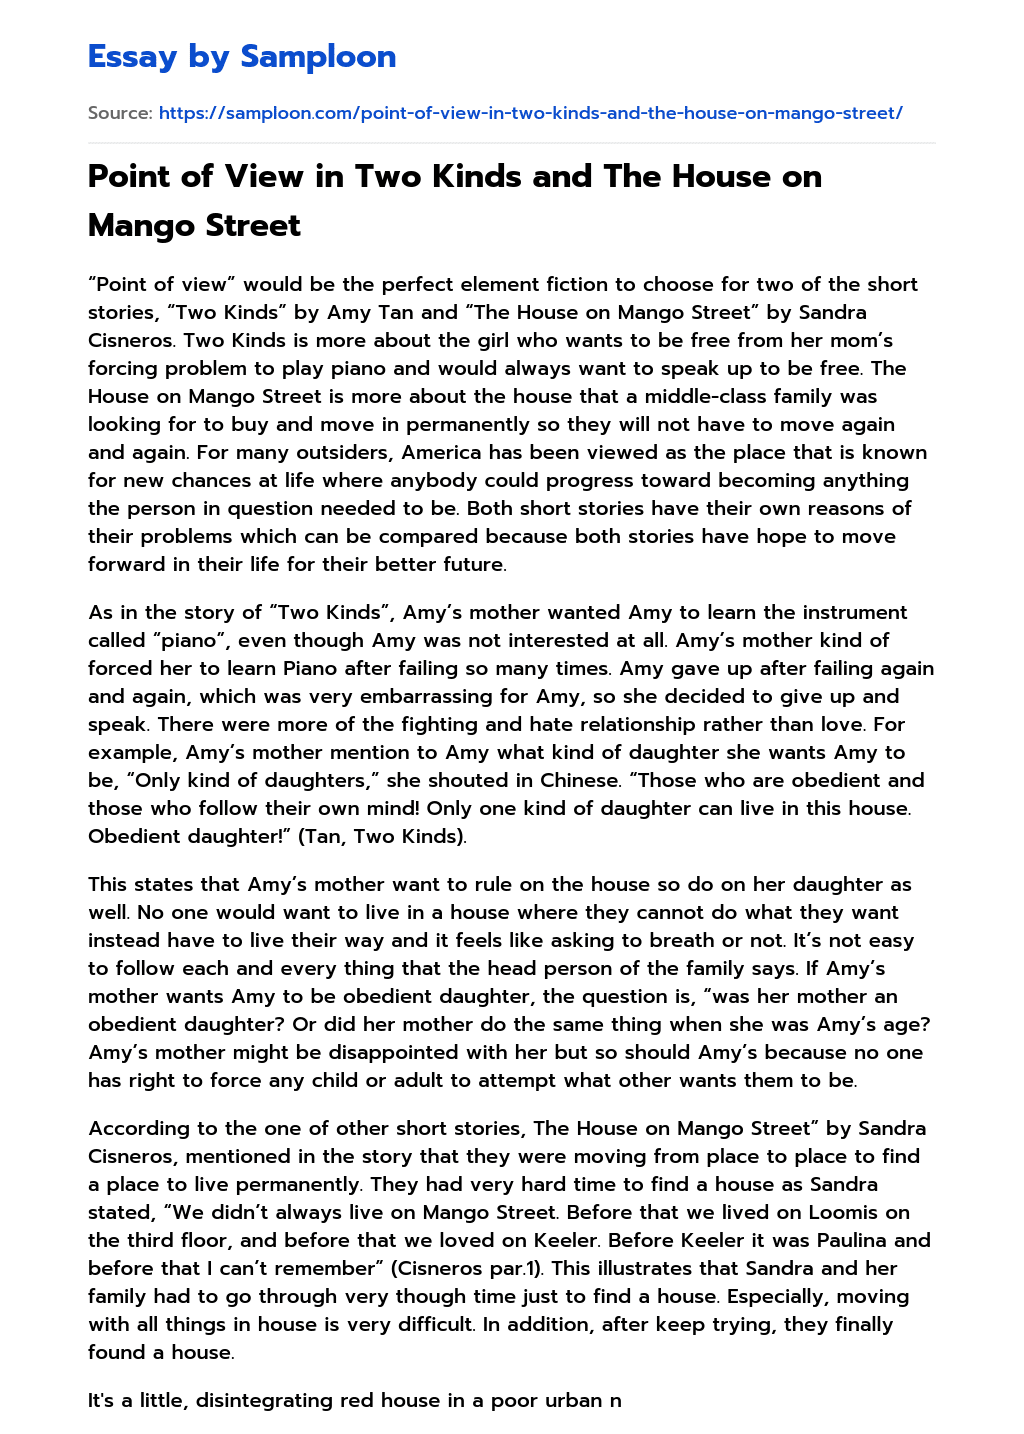 Point of View in Two Kinds and The House on Mango Street Compare And Contrast essay